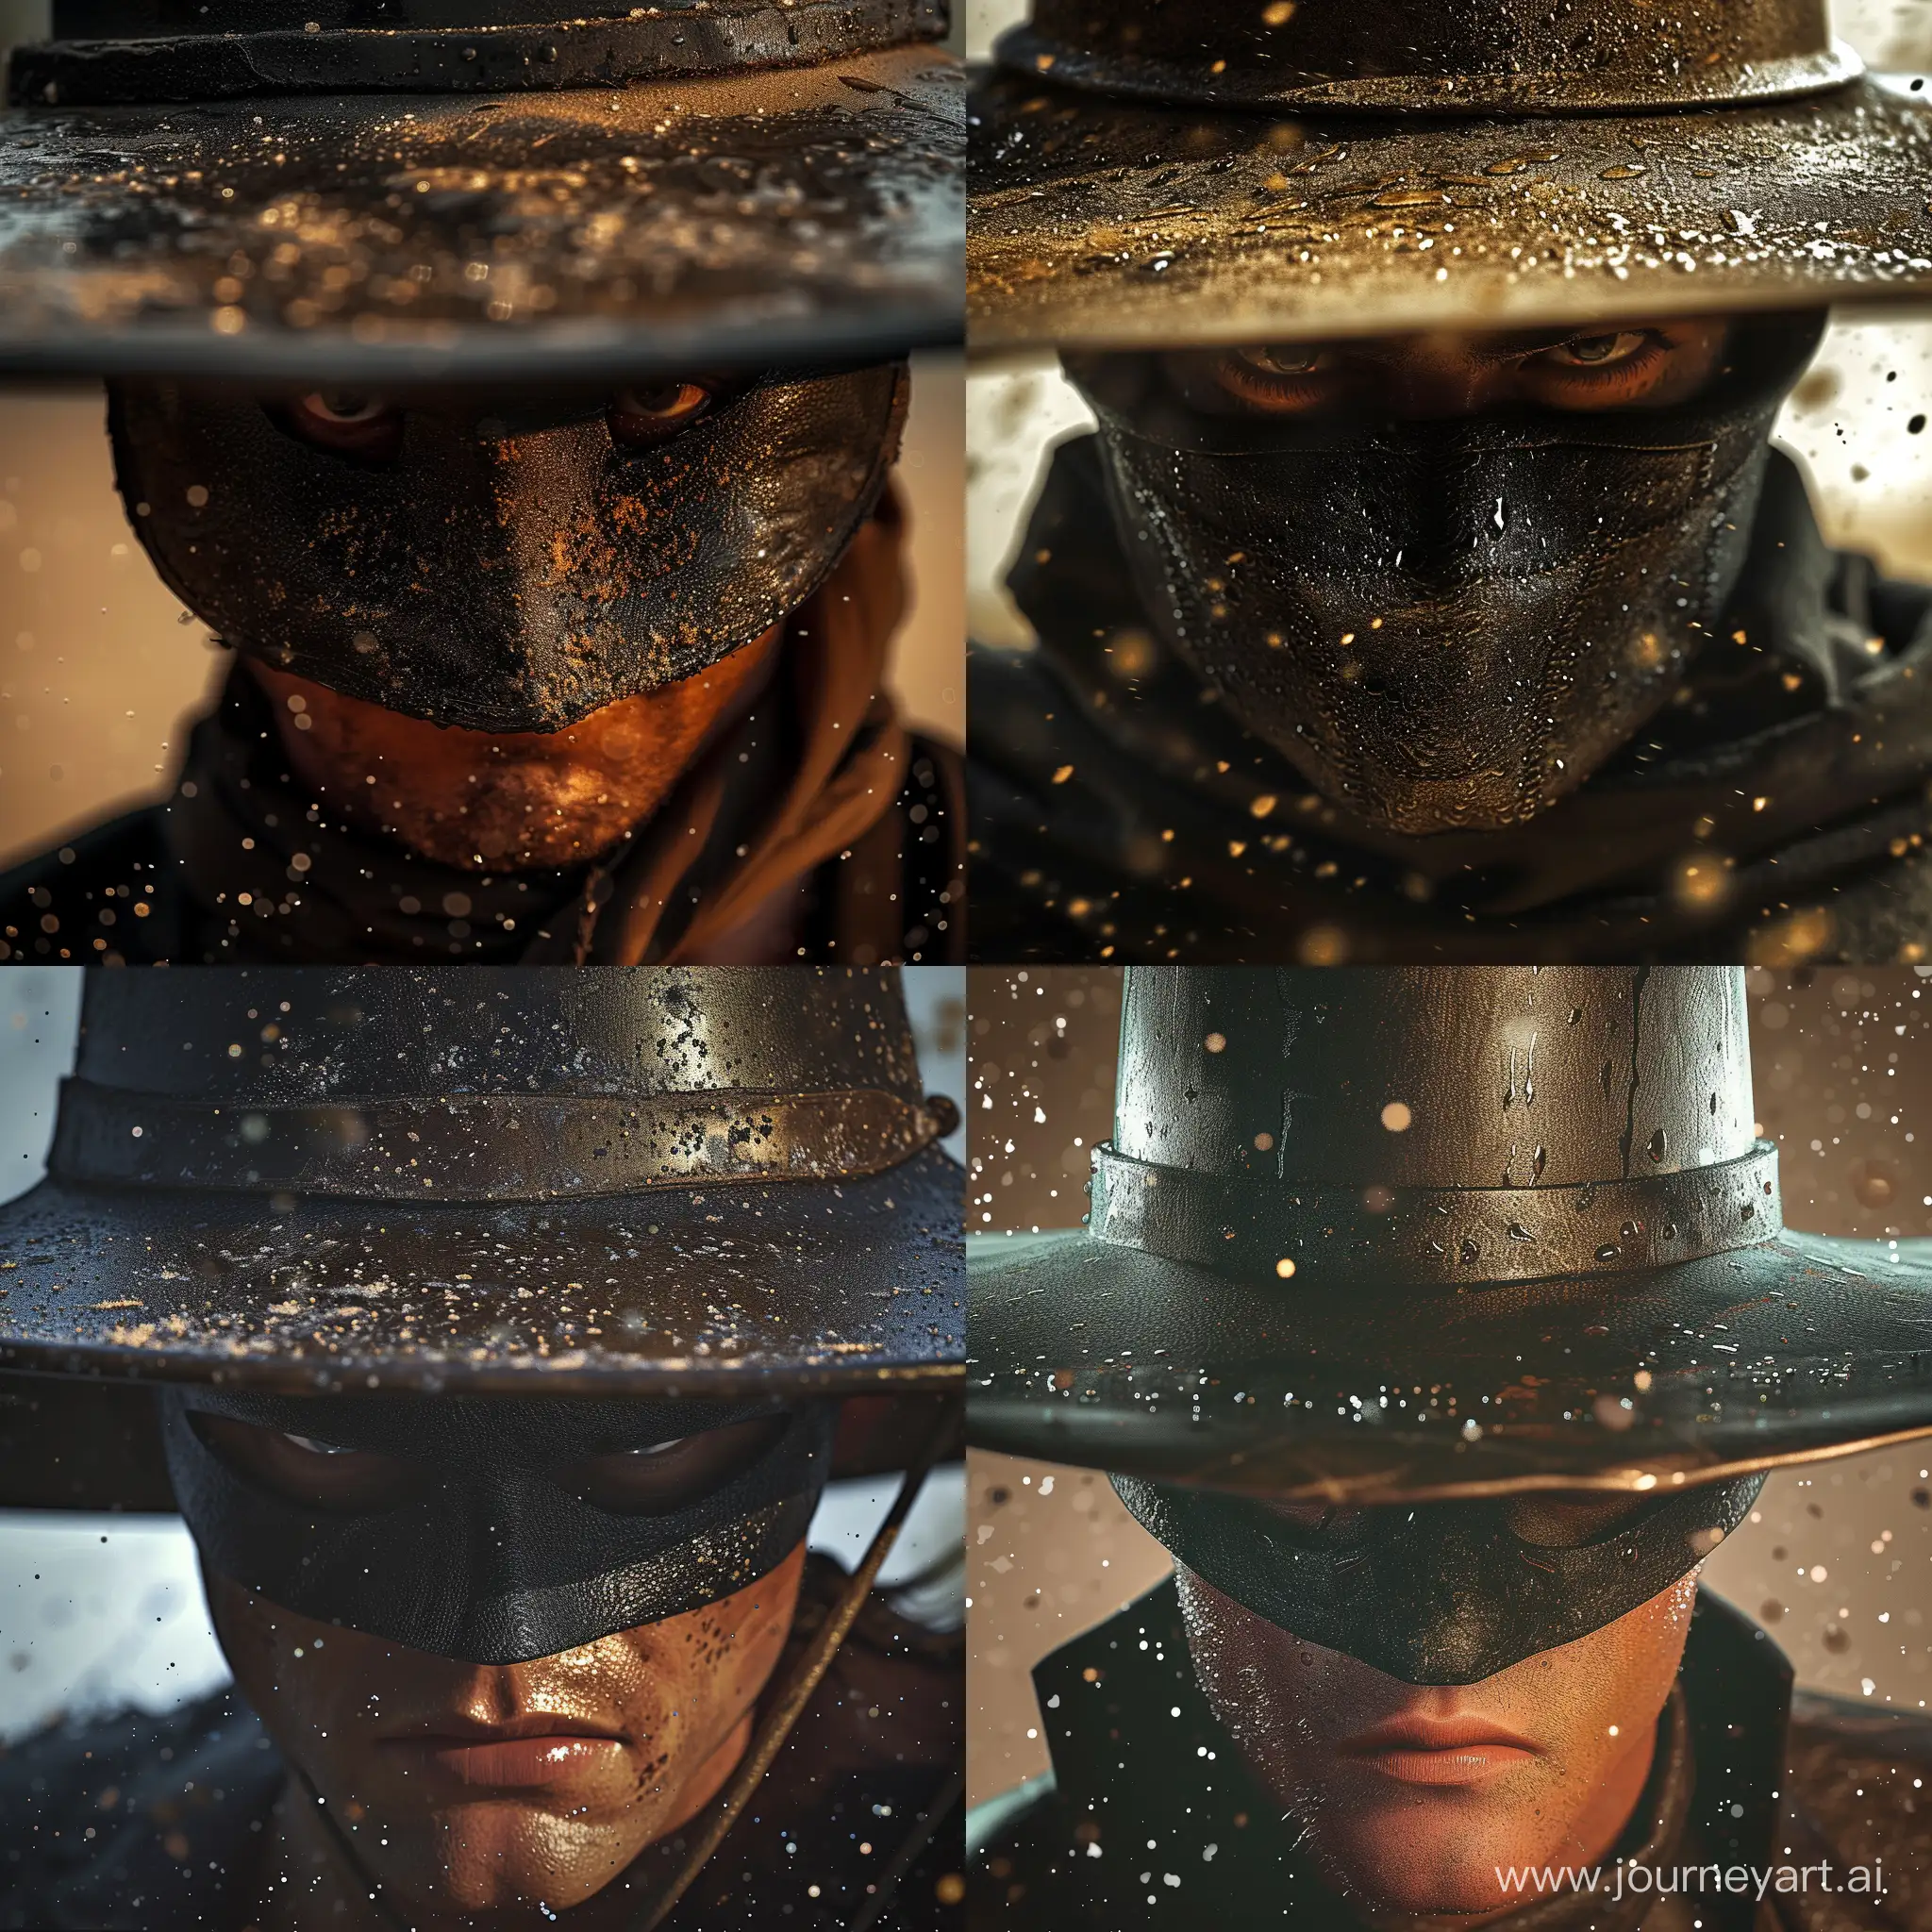 a close-up of an individual wearing a costume that is reminiscent of a traditional Zorro outfit. This character is typically associated with a masked vigilante from Spanish Californian tales. The person is wearing a wide-brimmed hat and a black eye mask which covers the area around the eyes, leaving the rest of the face exposed. There's a noticeable texture on the mask that seems to be made of leather or a leather-like material. Various specks or droplets, perhaps simulating rain or sweat, are visible on the hat and the person's skin, which adds a dramatic effect to the image. The lighting is soft and seems to be coming from the front, emphasizing the person's stern and intense gaze. The background is blurred, focusing the attention on the person's features and the details of the costume.